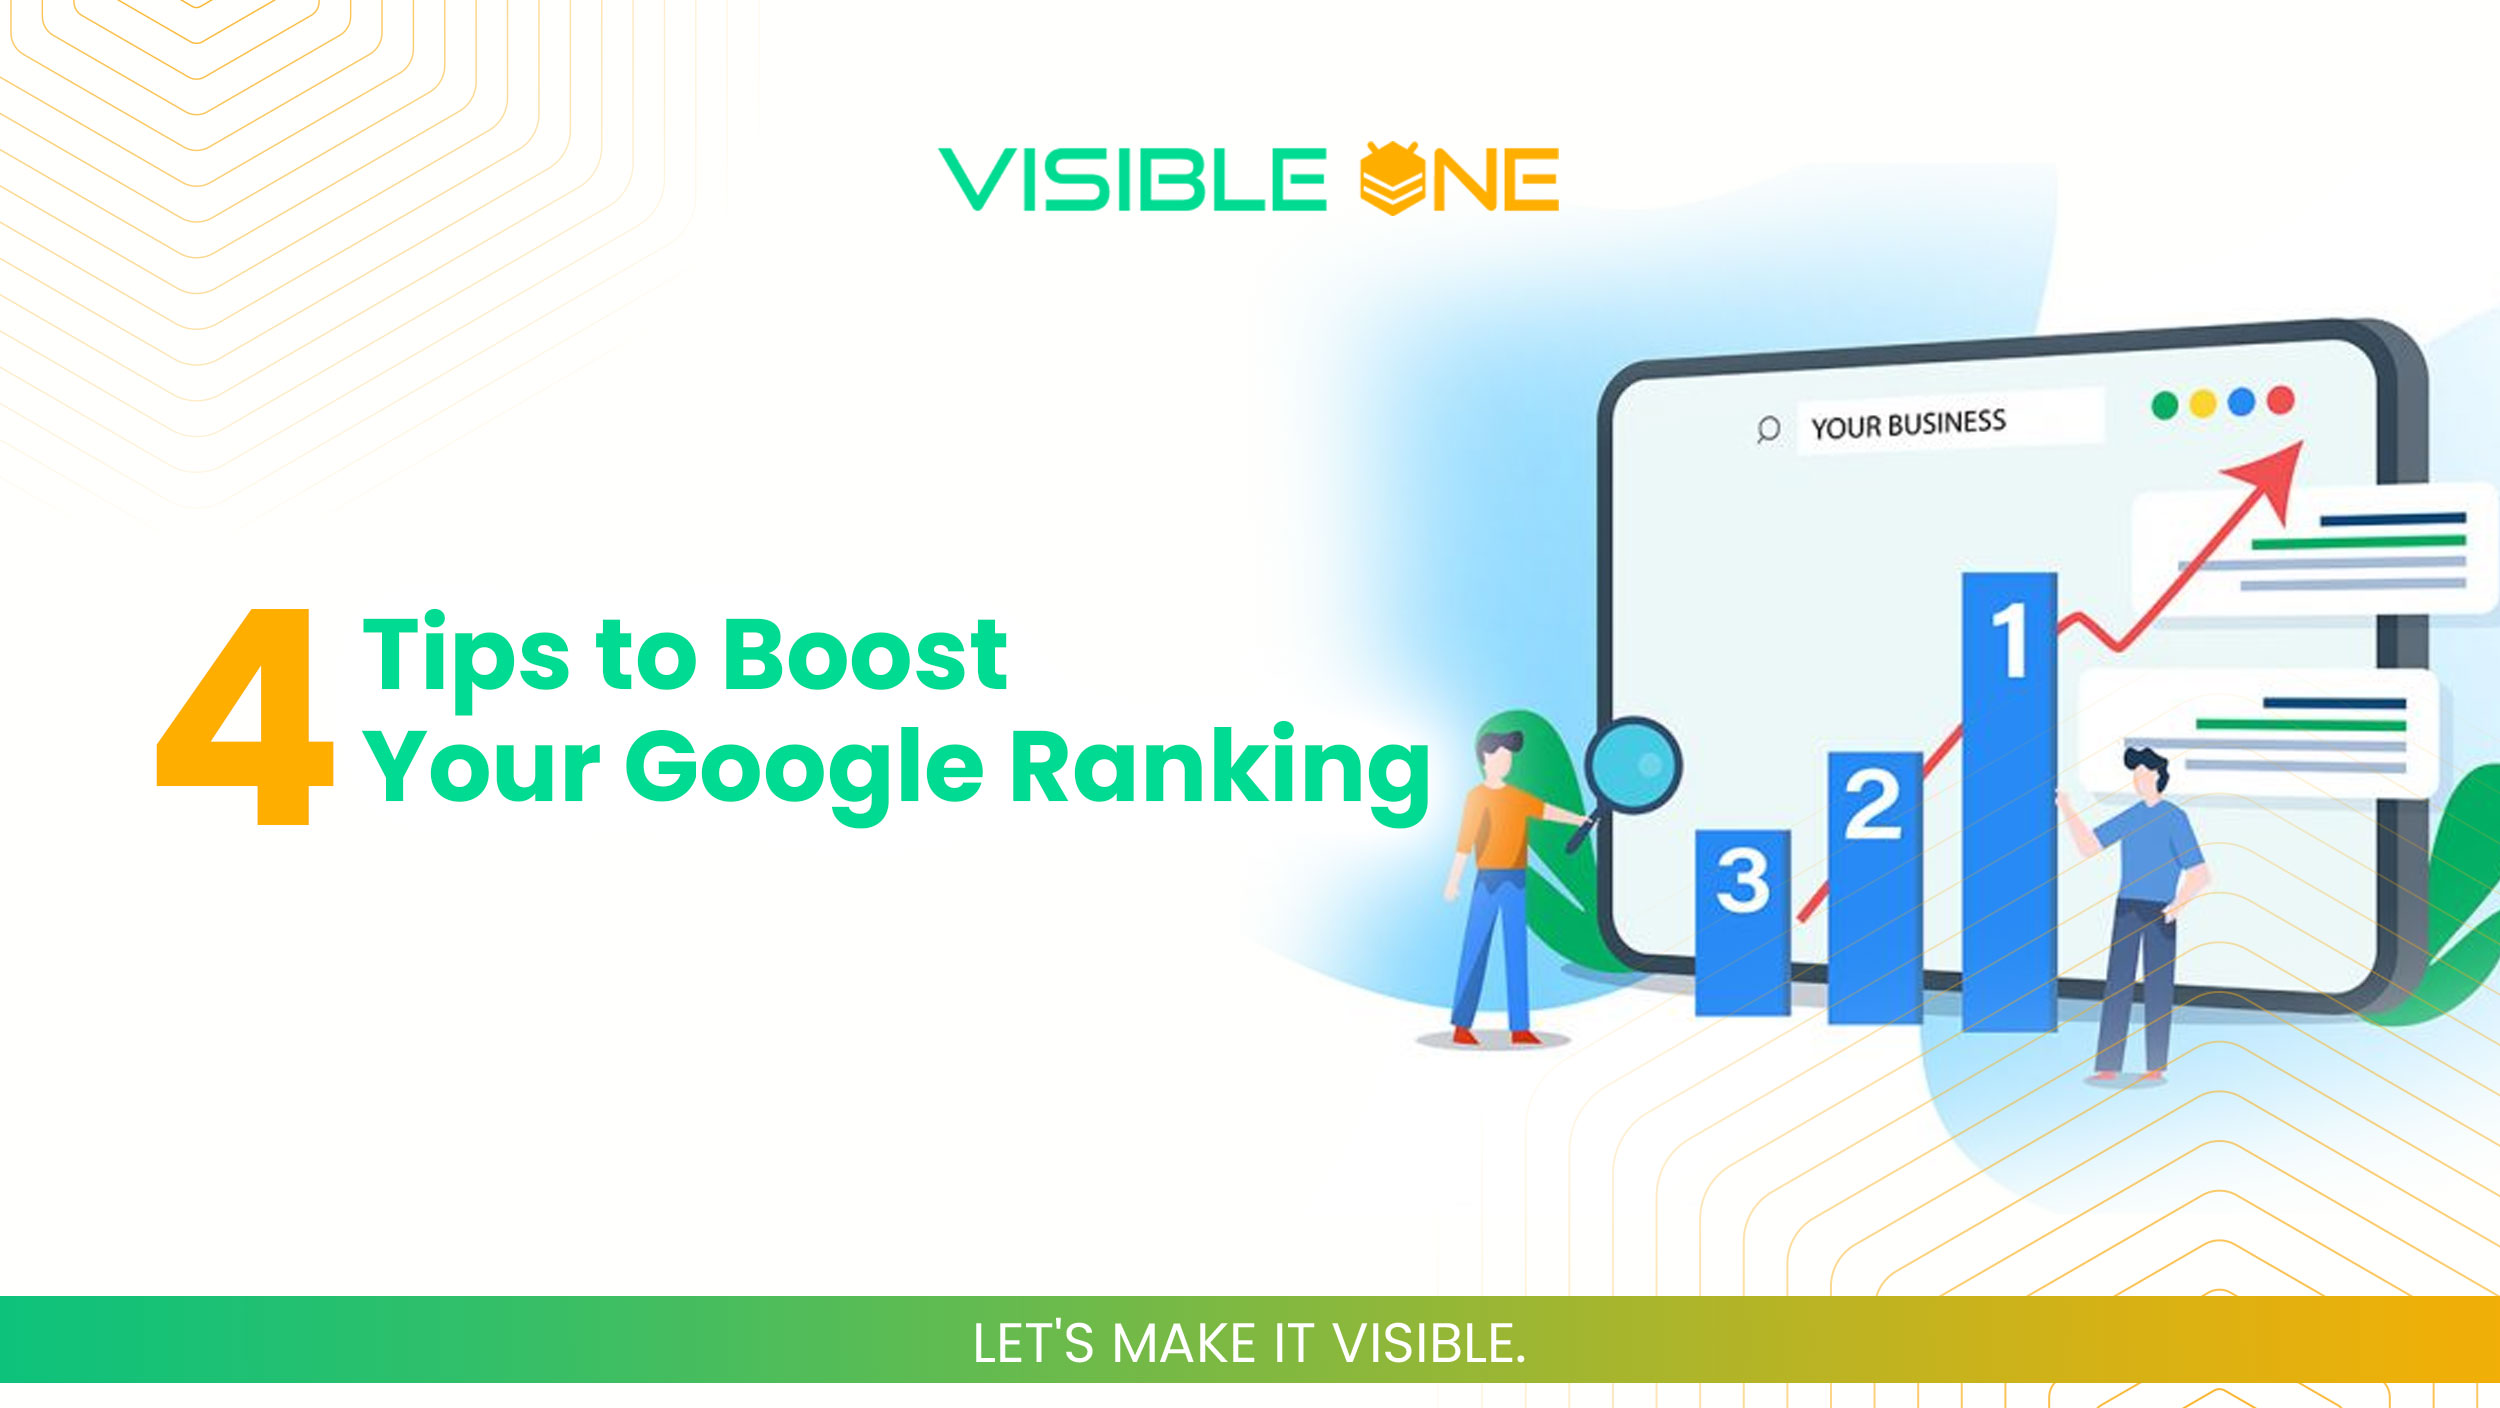 4 Tips to Boost Your Google Ranking!